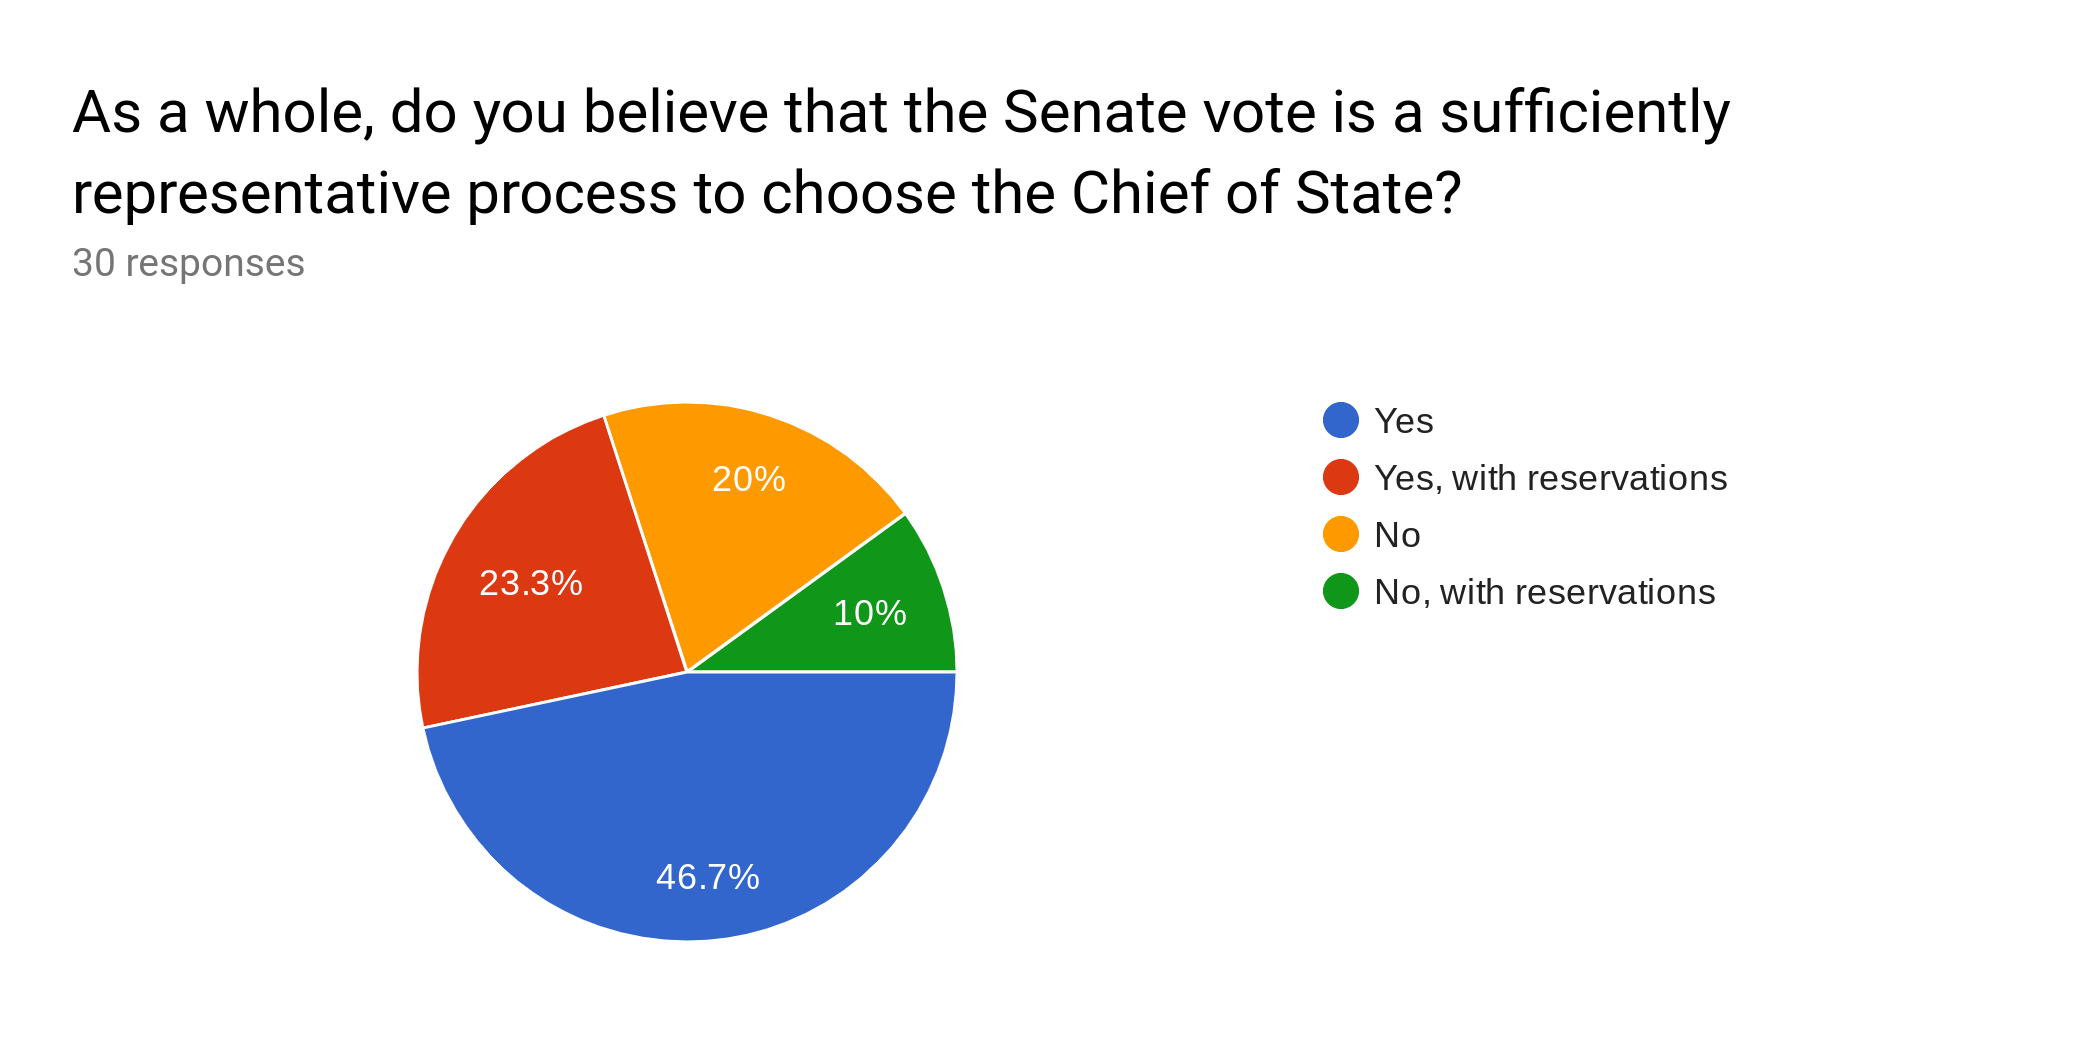 Forms response chart. Question title: As a whole, do you believe that the Senate vote is a sufficiently representative process to choose the Chief of State?. Number of responses: 30 responses.